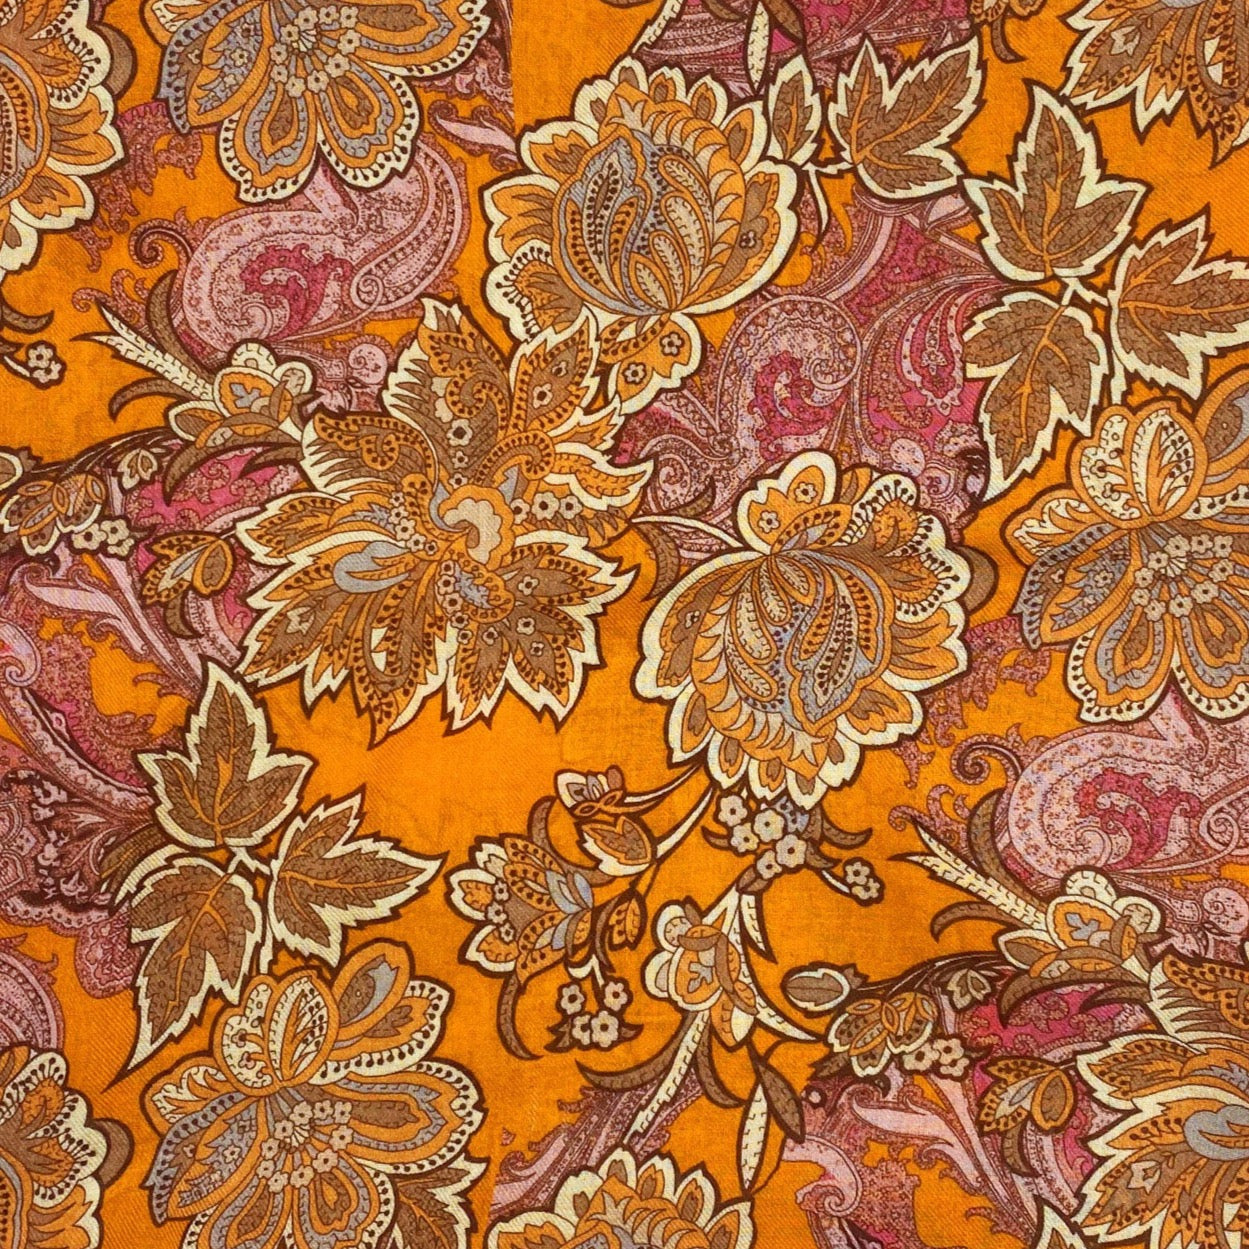 A flat, folded view of 'The Niagra' wide scarf. Clearly showing the intricate floral and leaf patterns in various shades of orange and pink on a deep orange background.